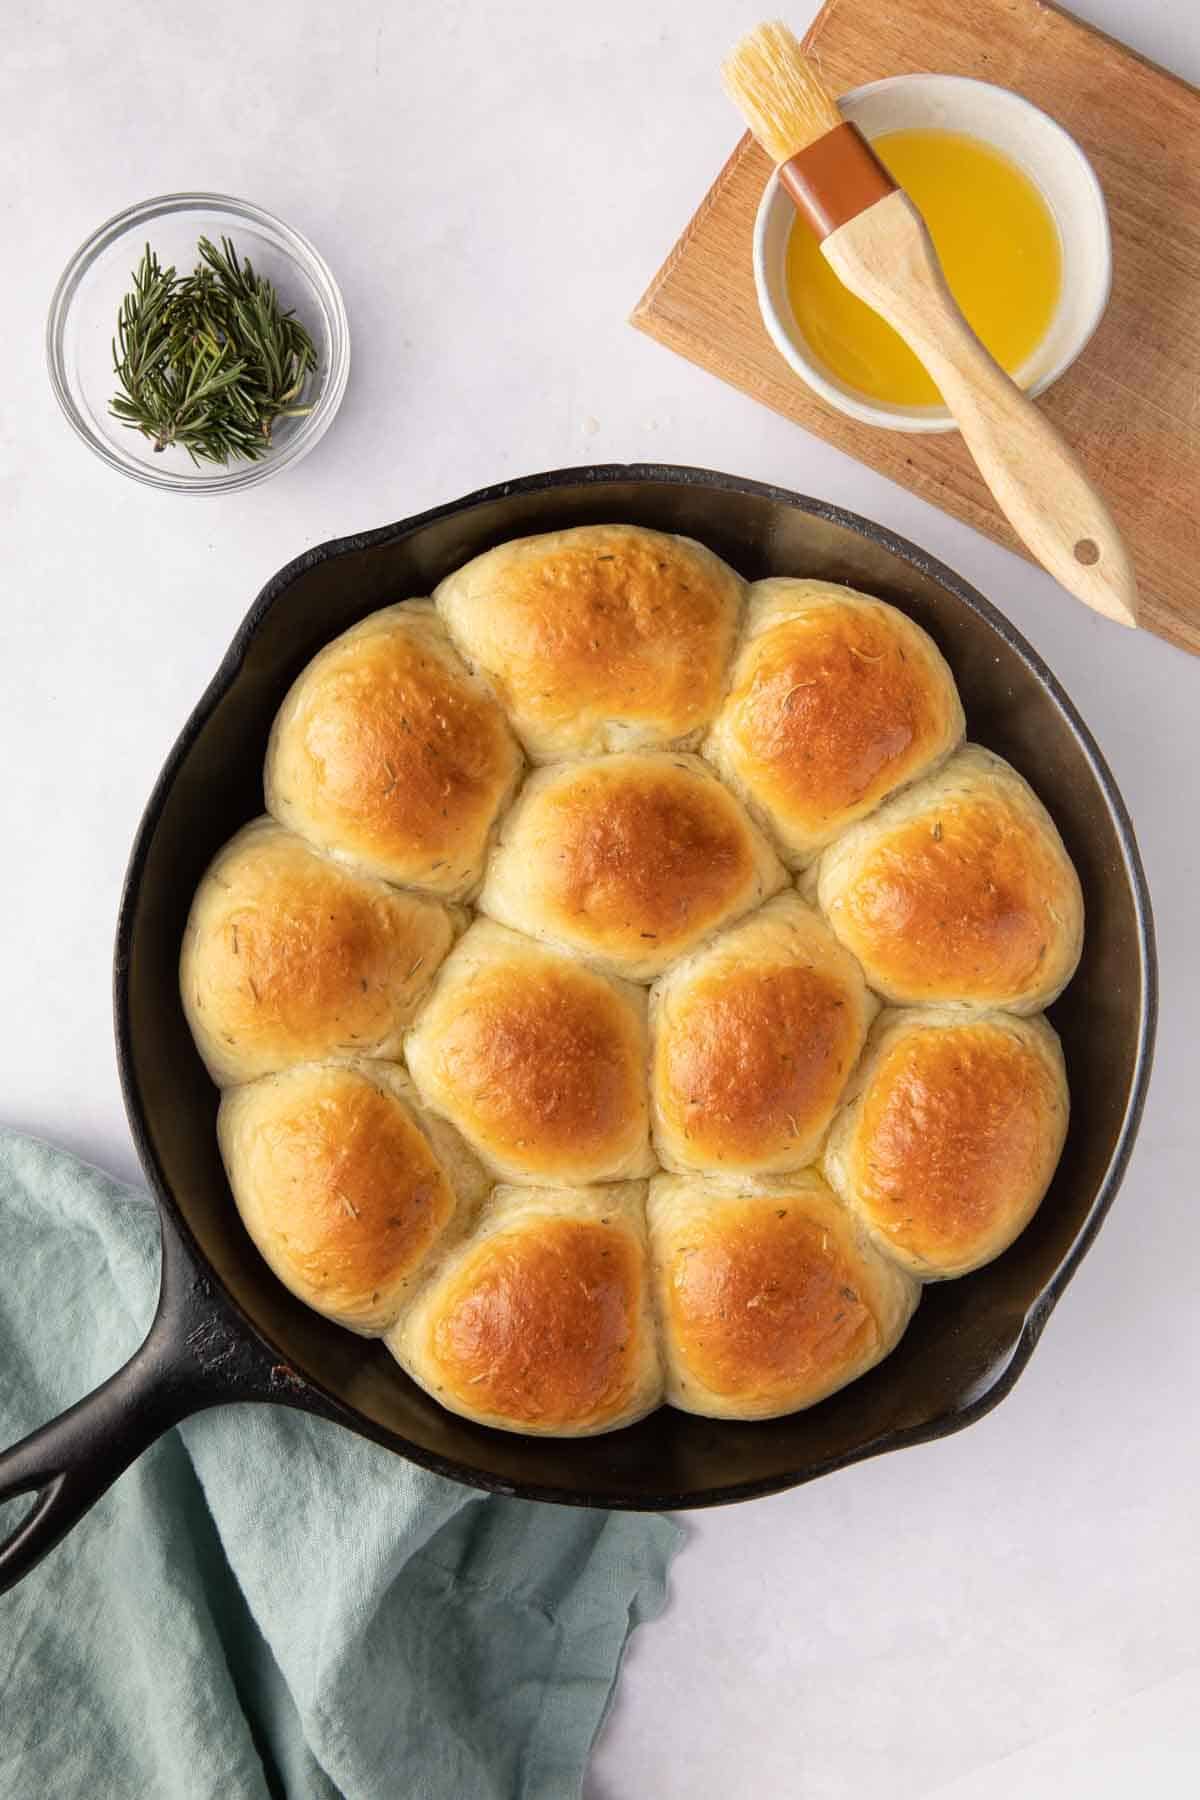 https://feelgoodfoodie.net/wp-content/uploads/2022/11/Garlic-and-Herb-Skillet-Dinner-Rolls-21-rotated.jpg